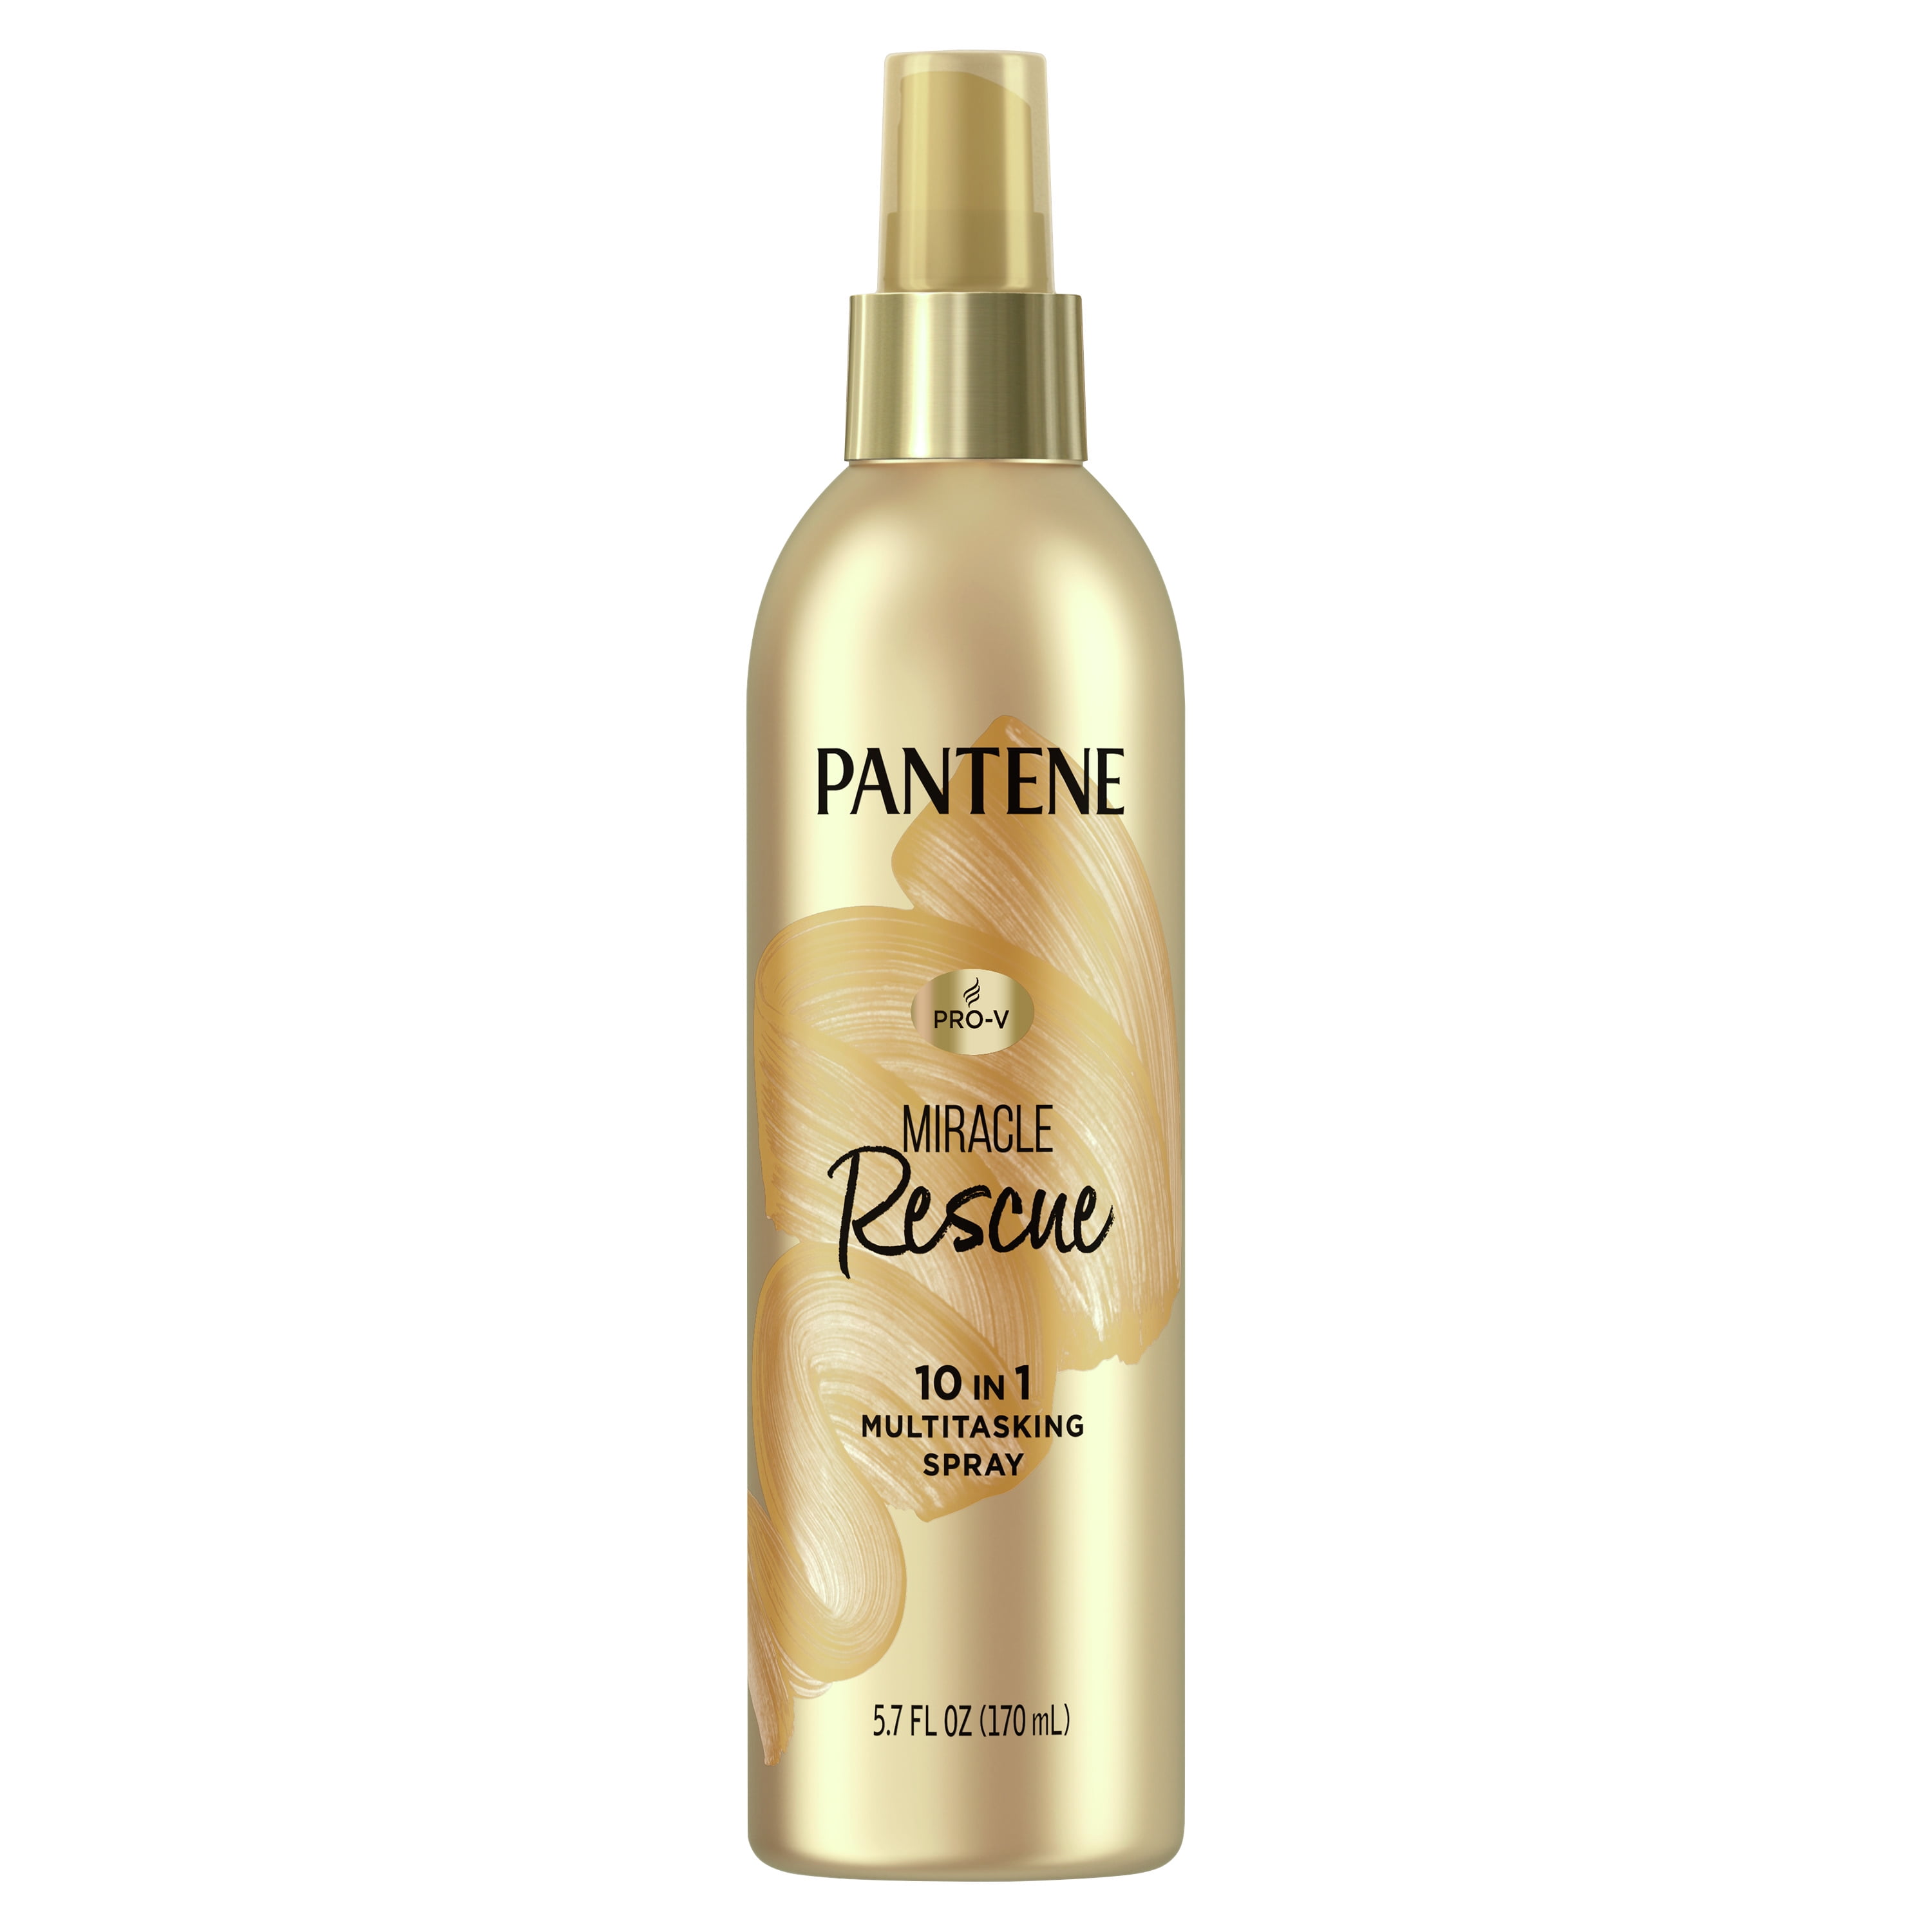 Pantene Heat Protectant Spray with Jojoba Curly Hair, Blends Lock Curl Mist,  Sulfate oz Twin Pack - Walmart.com